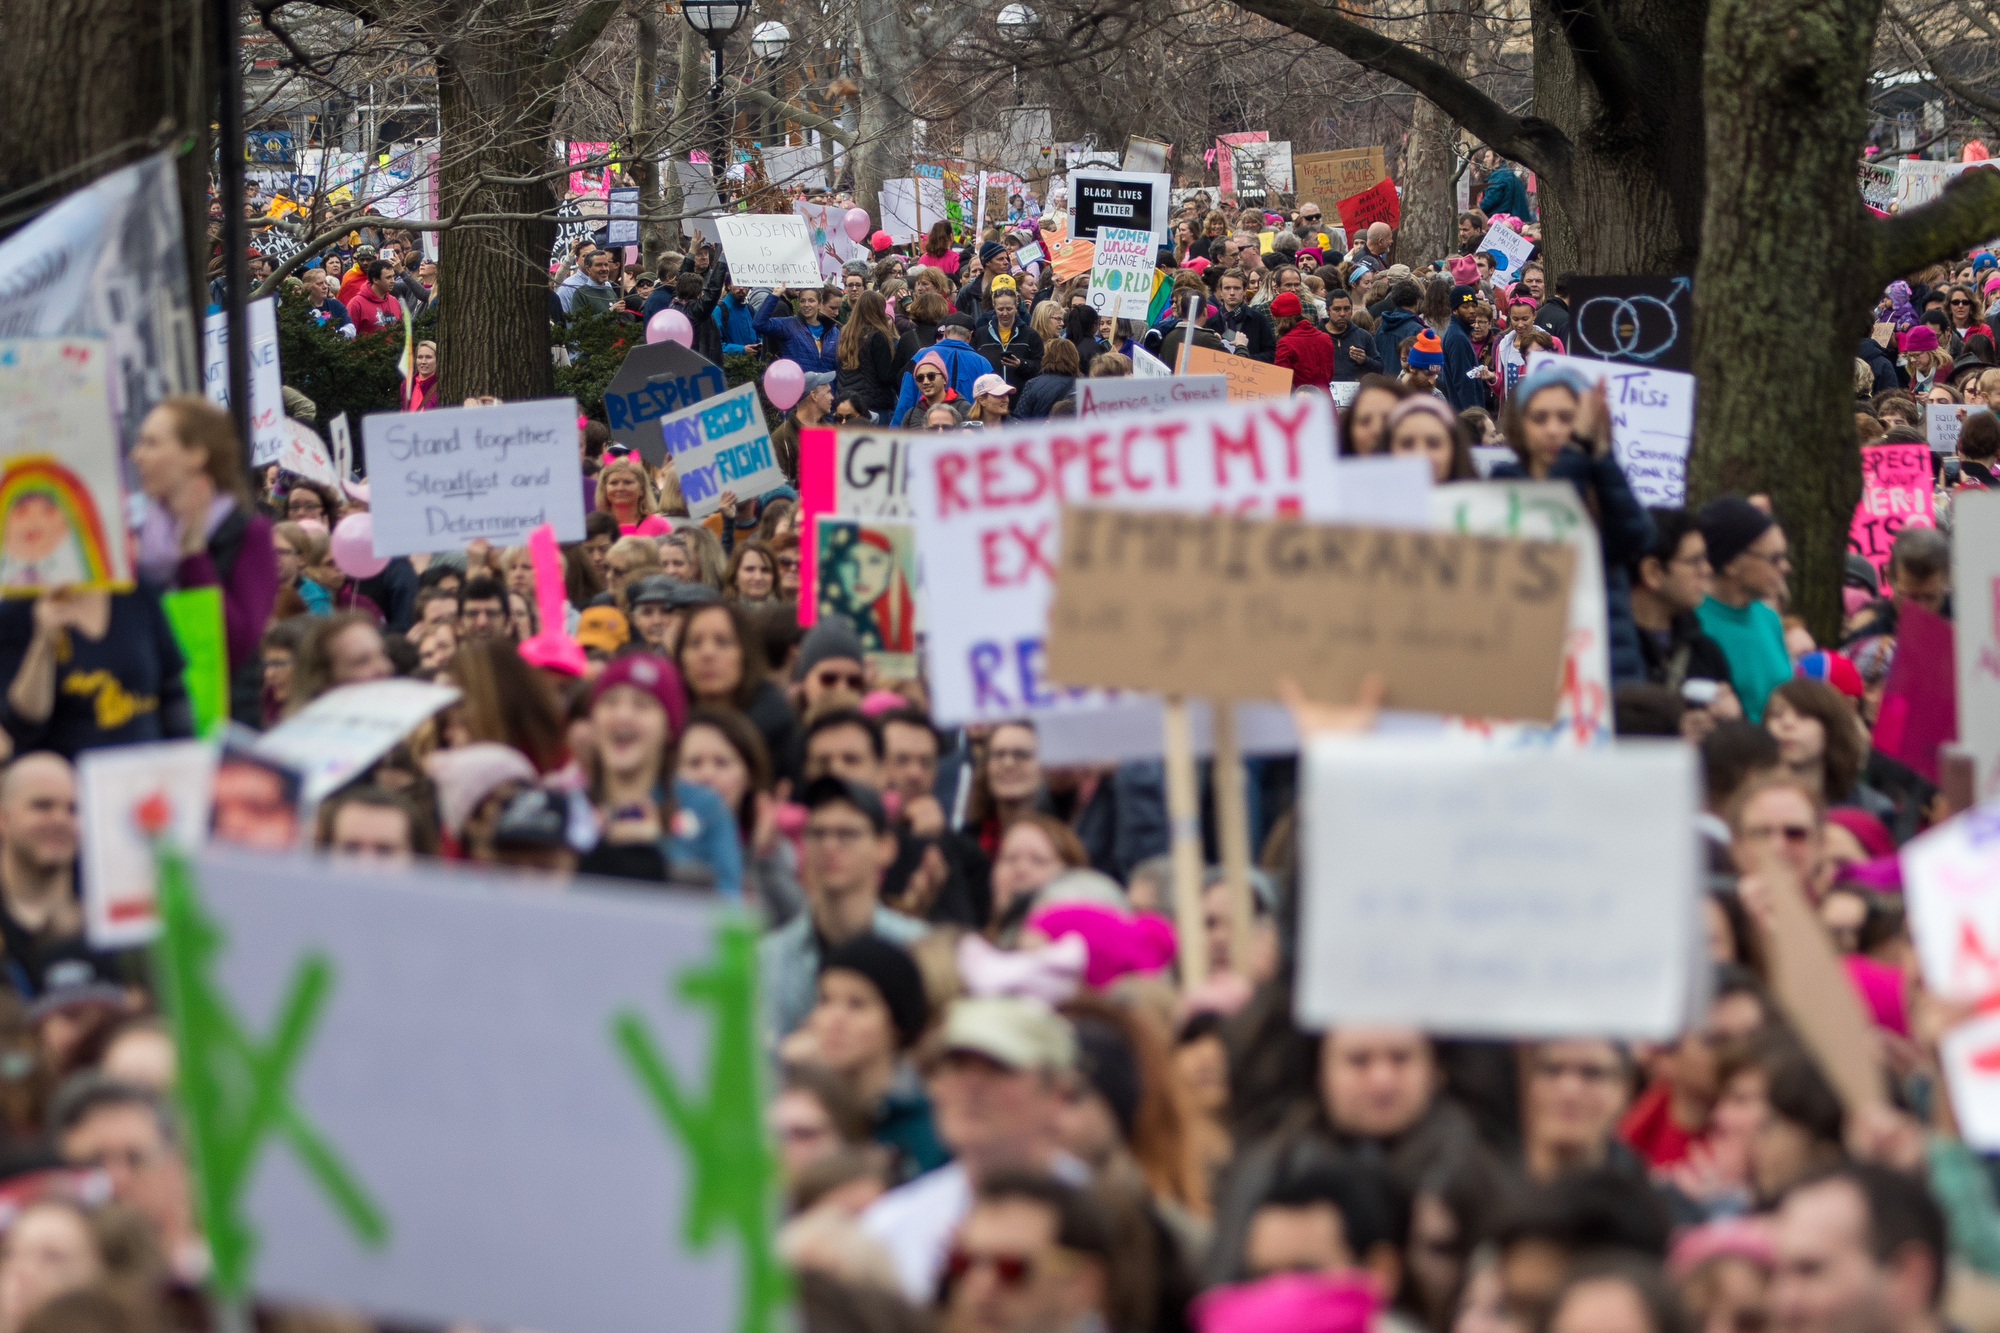  Thousands gather at the Diag at the University of Michigan during the Women's March on Saturday, January 21, 2017.  The march was one of several throughout the country and drew over 6,000 people. Matt Weigand | The Ann Arbor News 